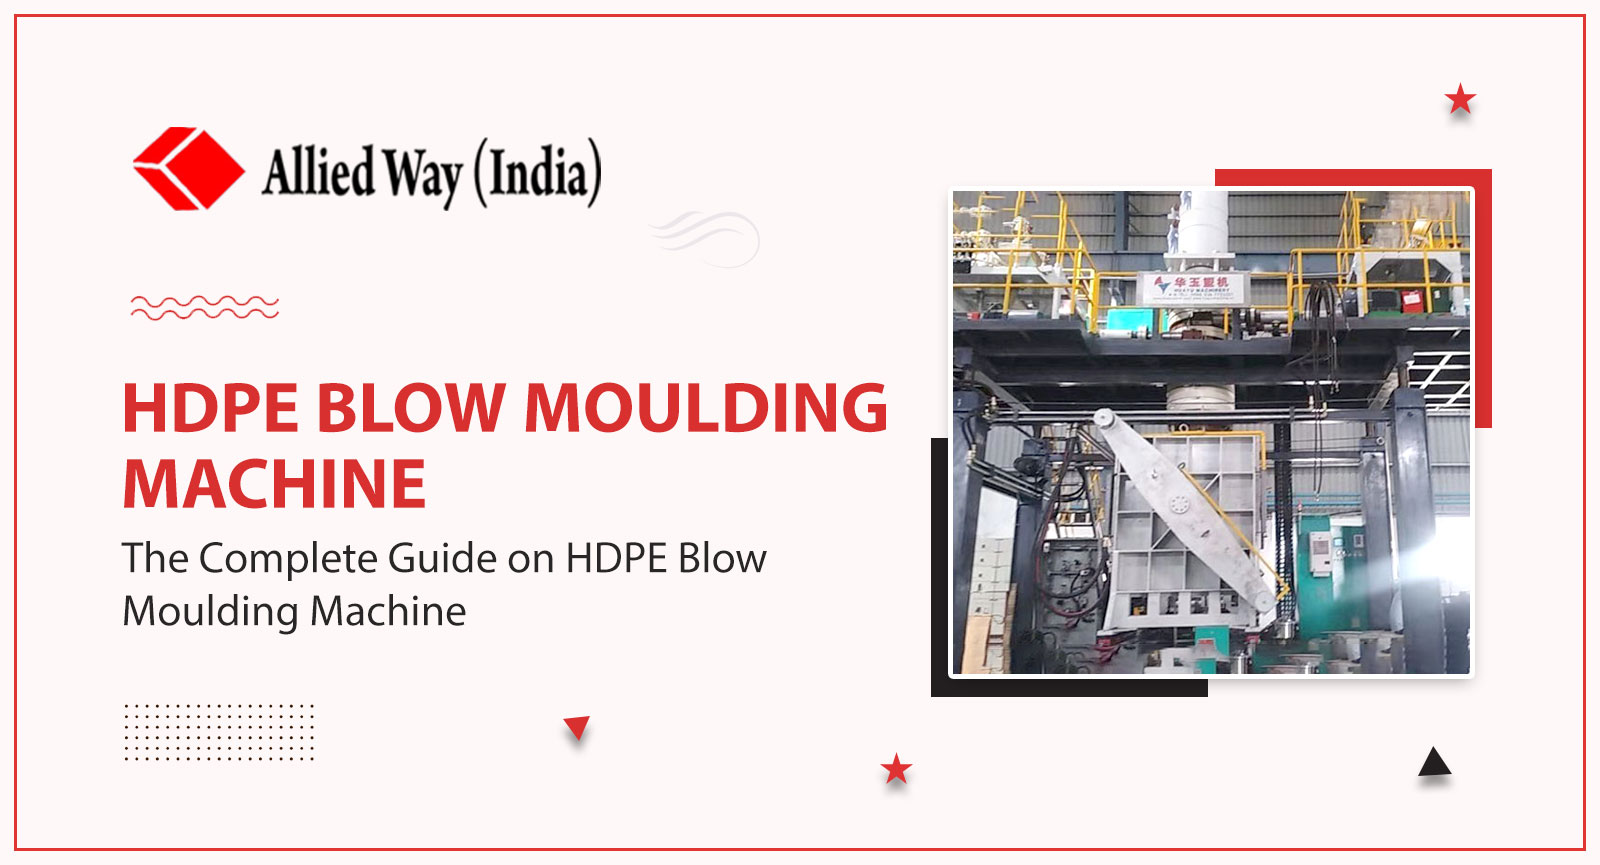 The Complete Guide on HDPE Blow Moulding Machine, AlliedWay (India)